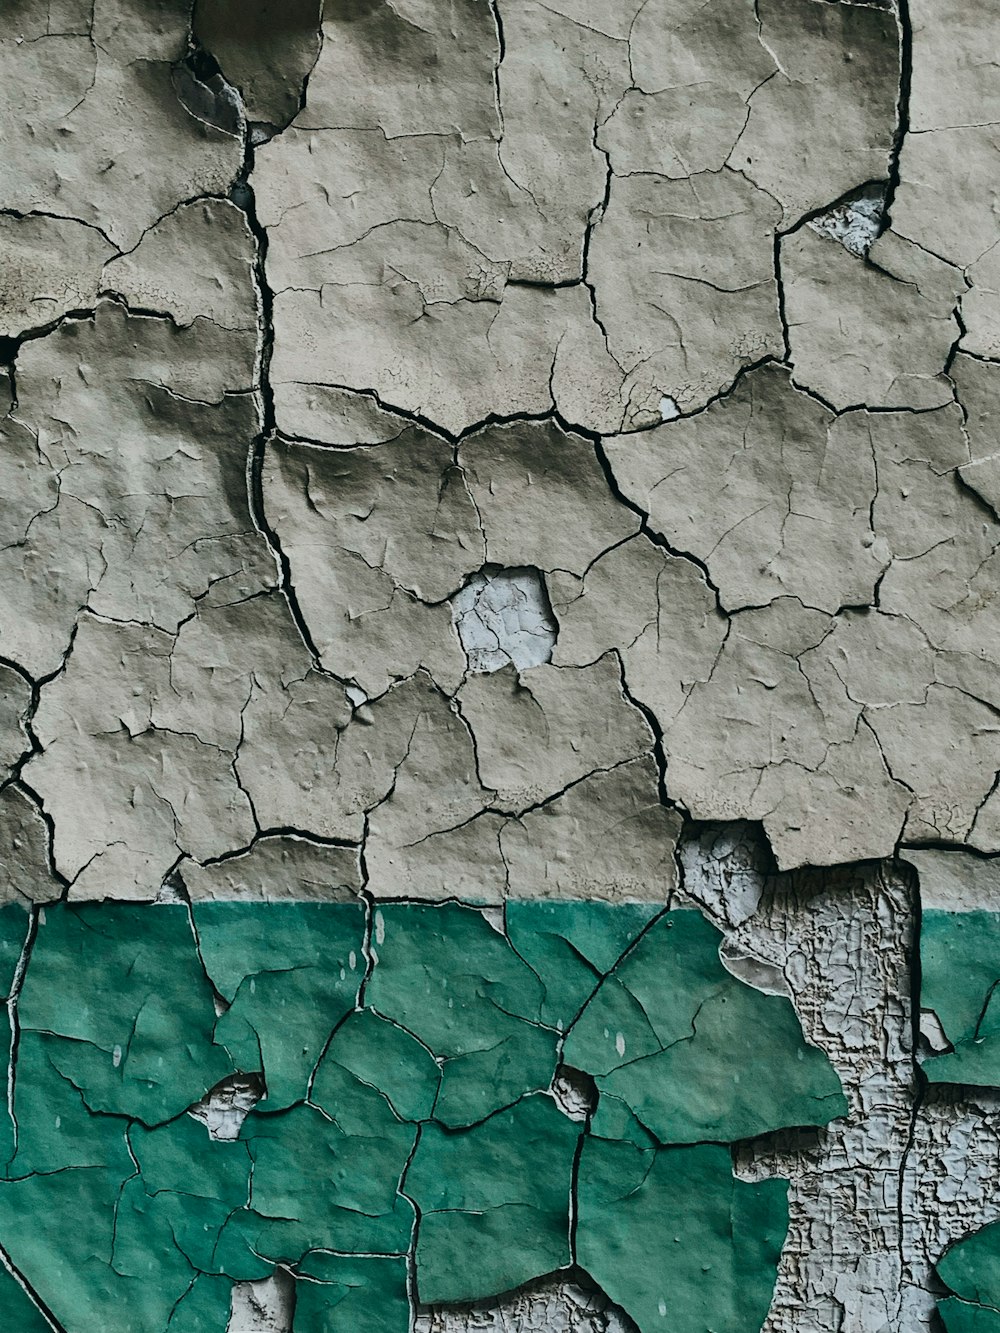 a close up of a cracked wall with green paint